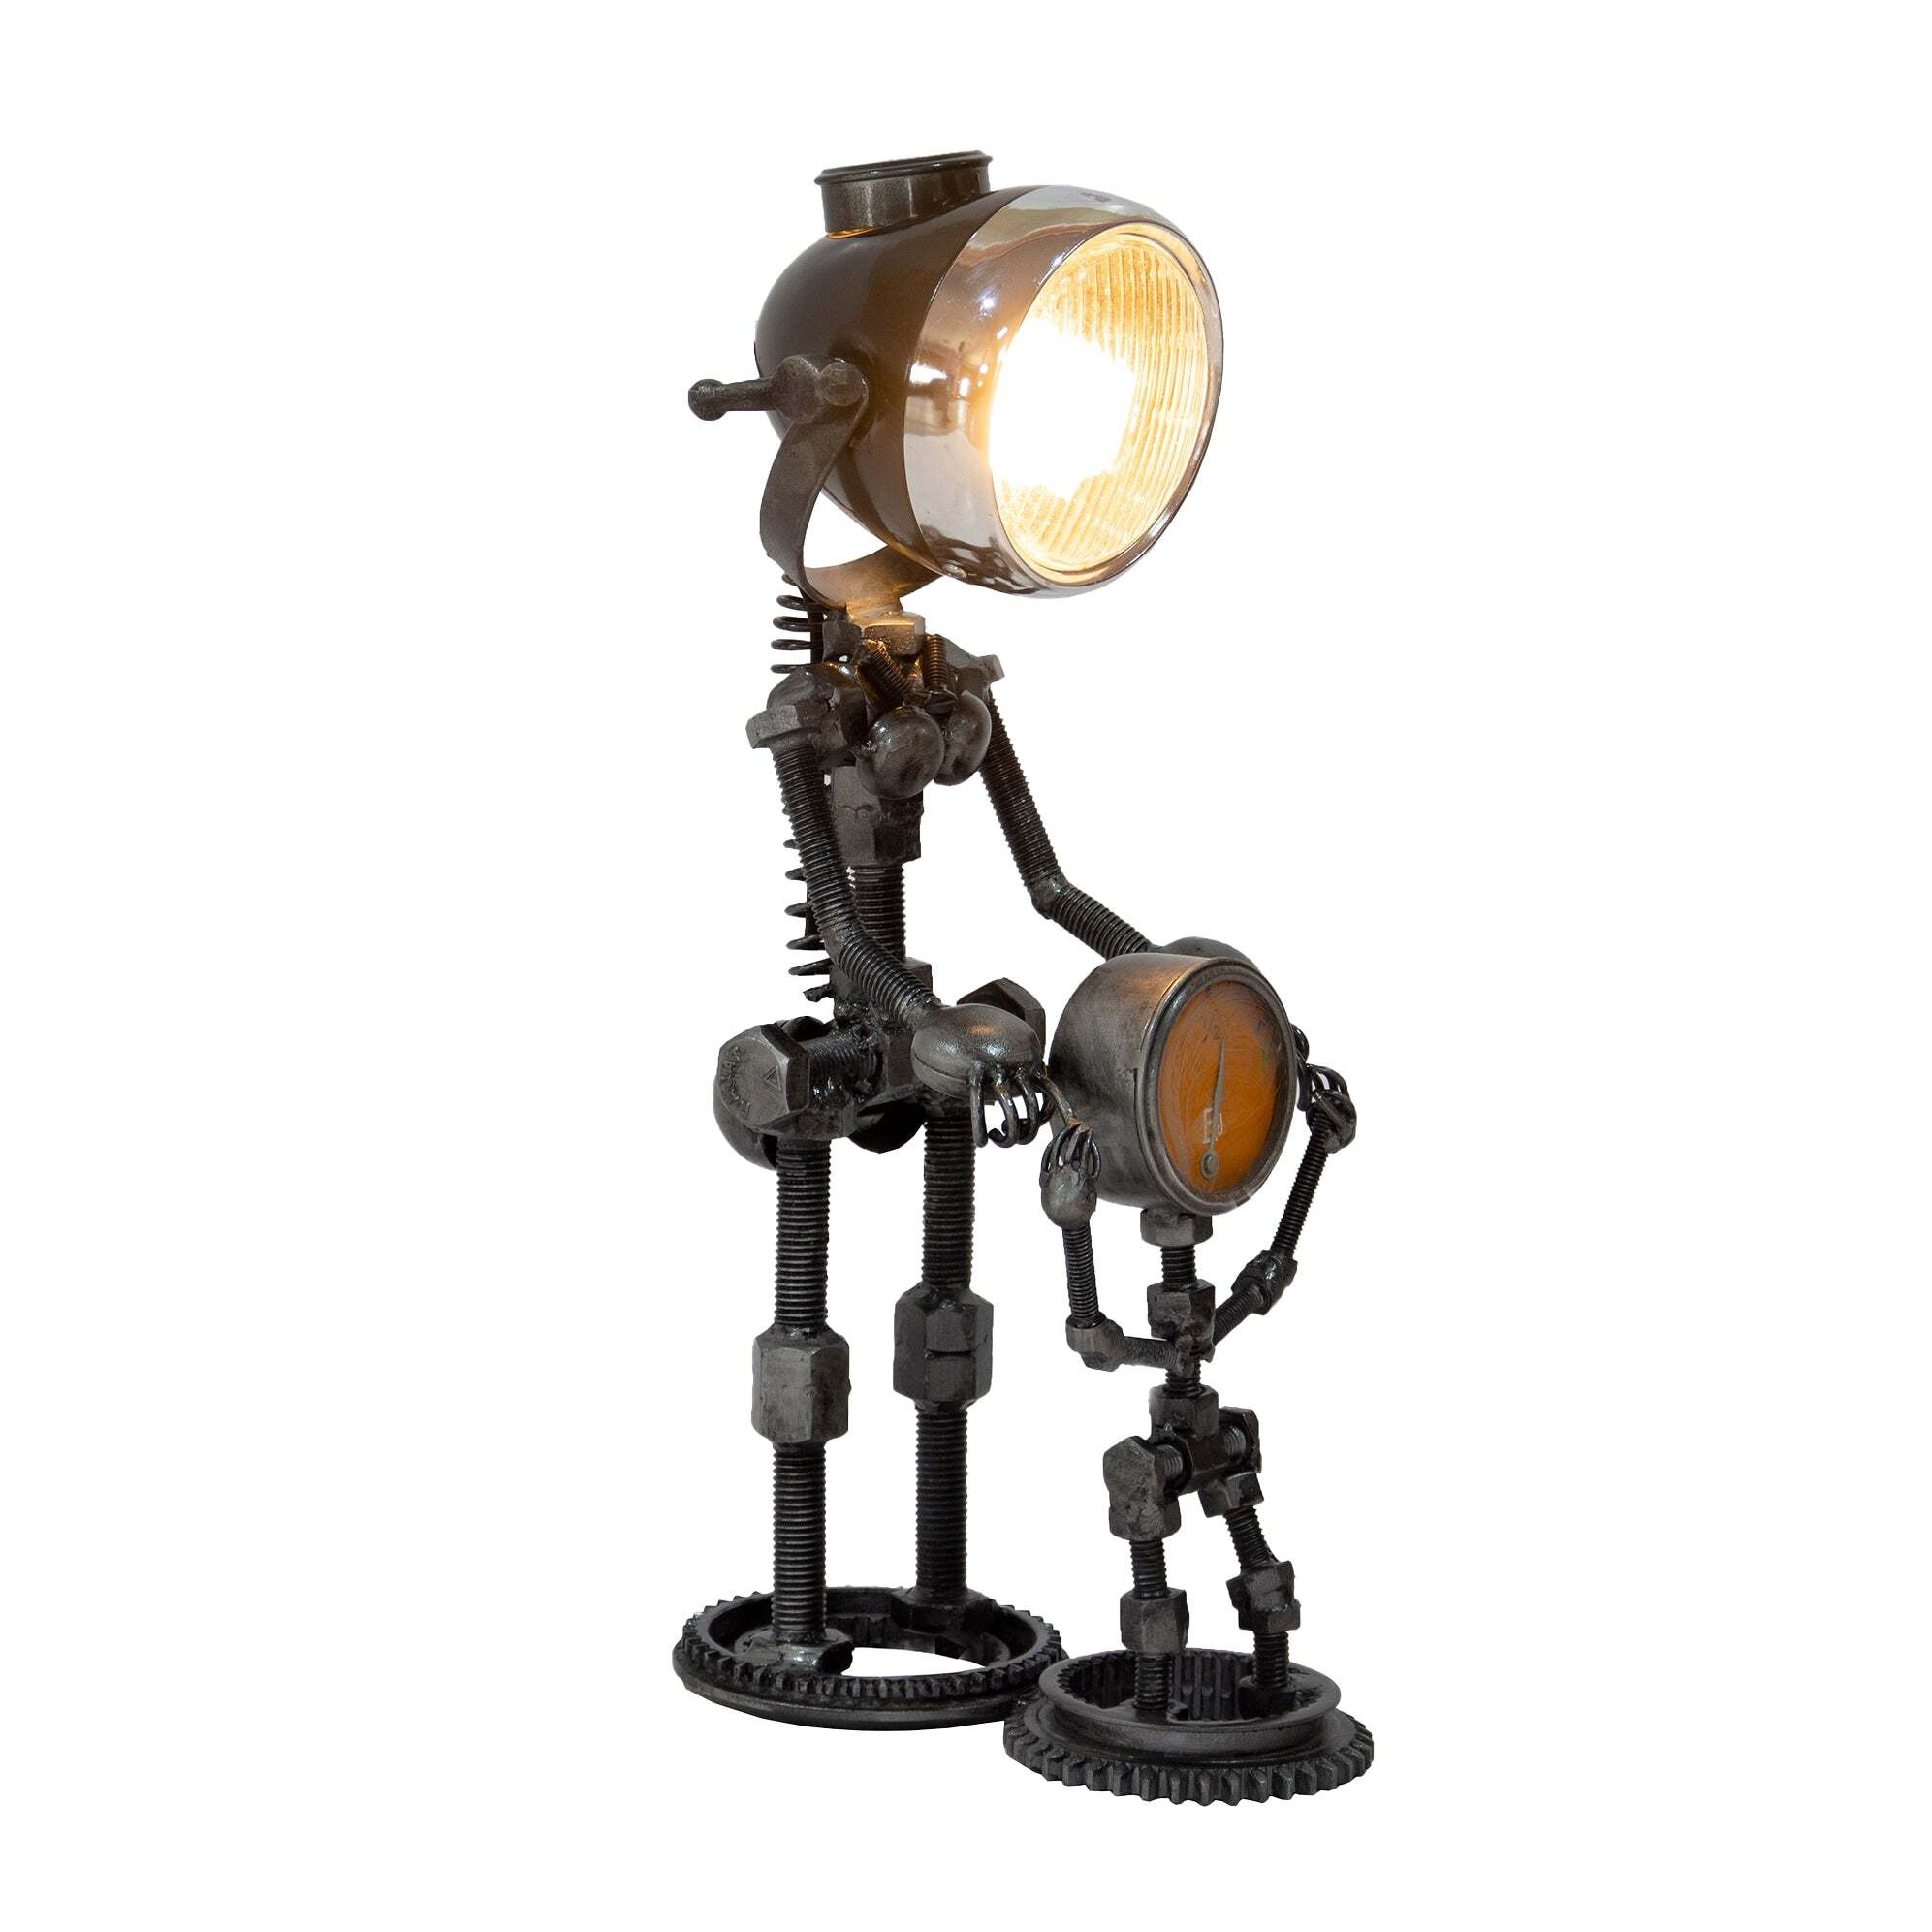 Reclaimed Parts Robot Table Lamp - Mother and Child - image 1